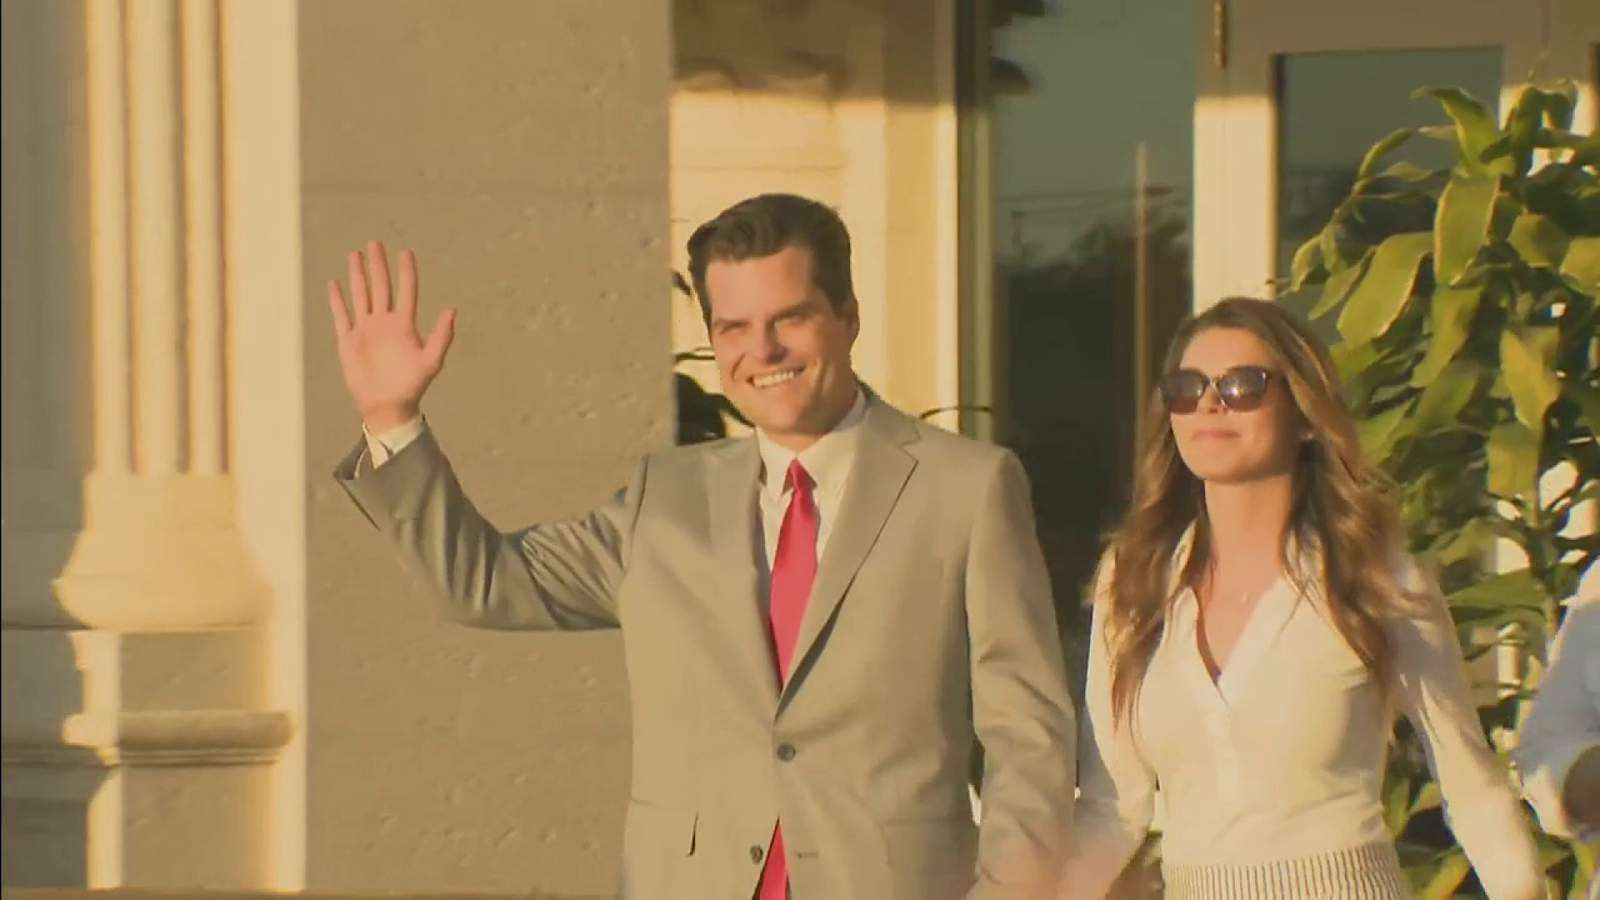 image for Rep. Matt Gaetz allegedly connected to Florida shill candidate scheme